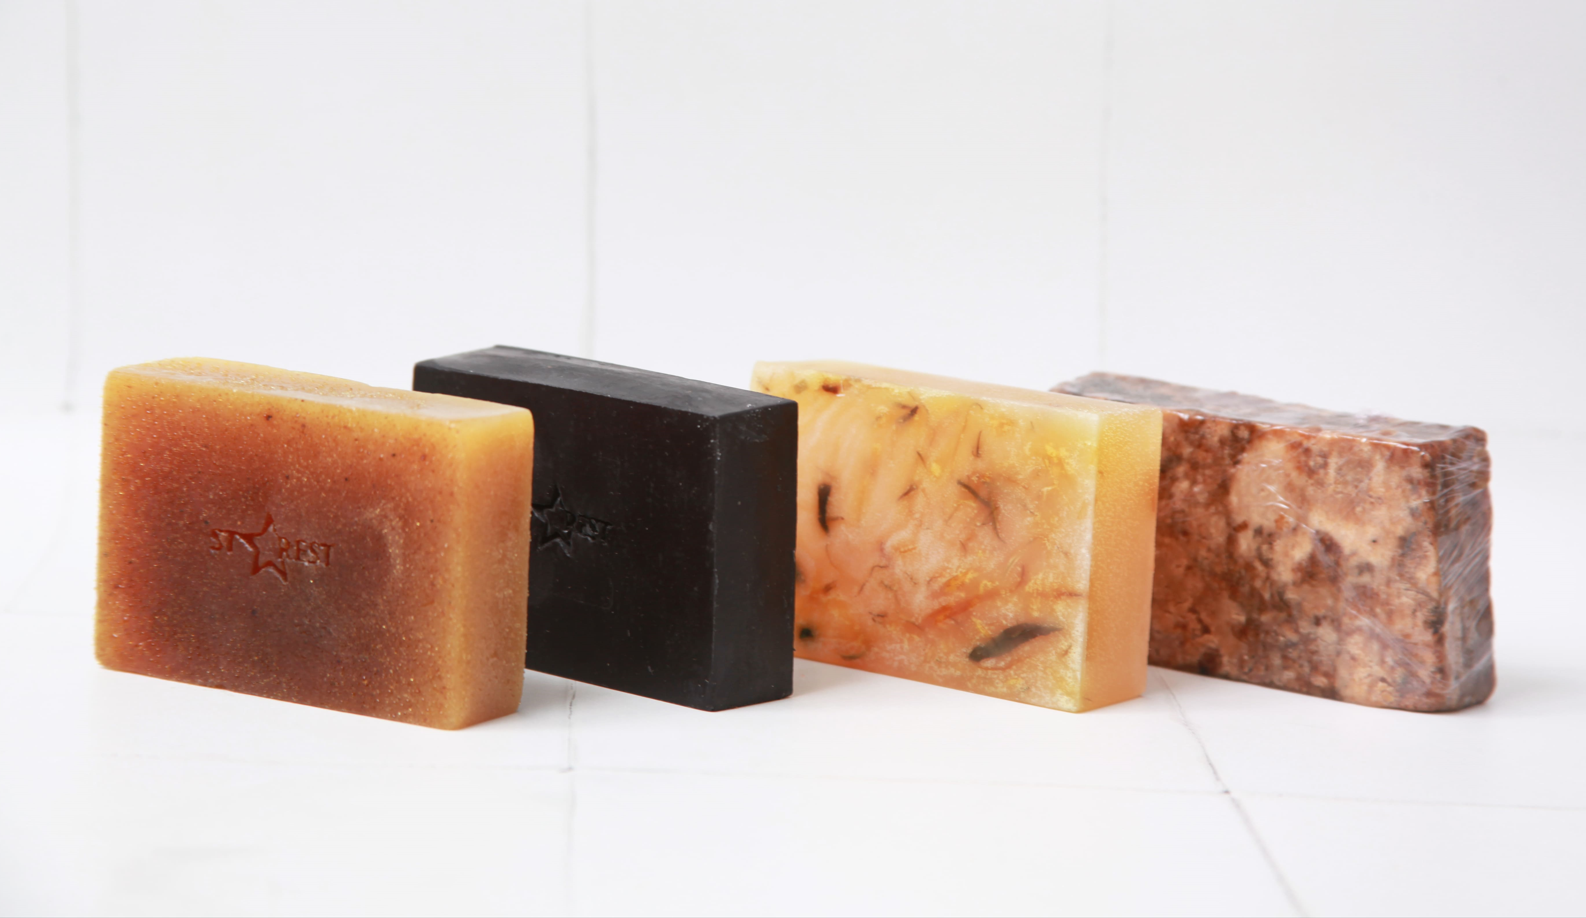 ALOE AND ACTIVATED CHARCOAL MELT AND POUR SOAP